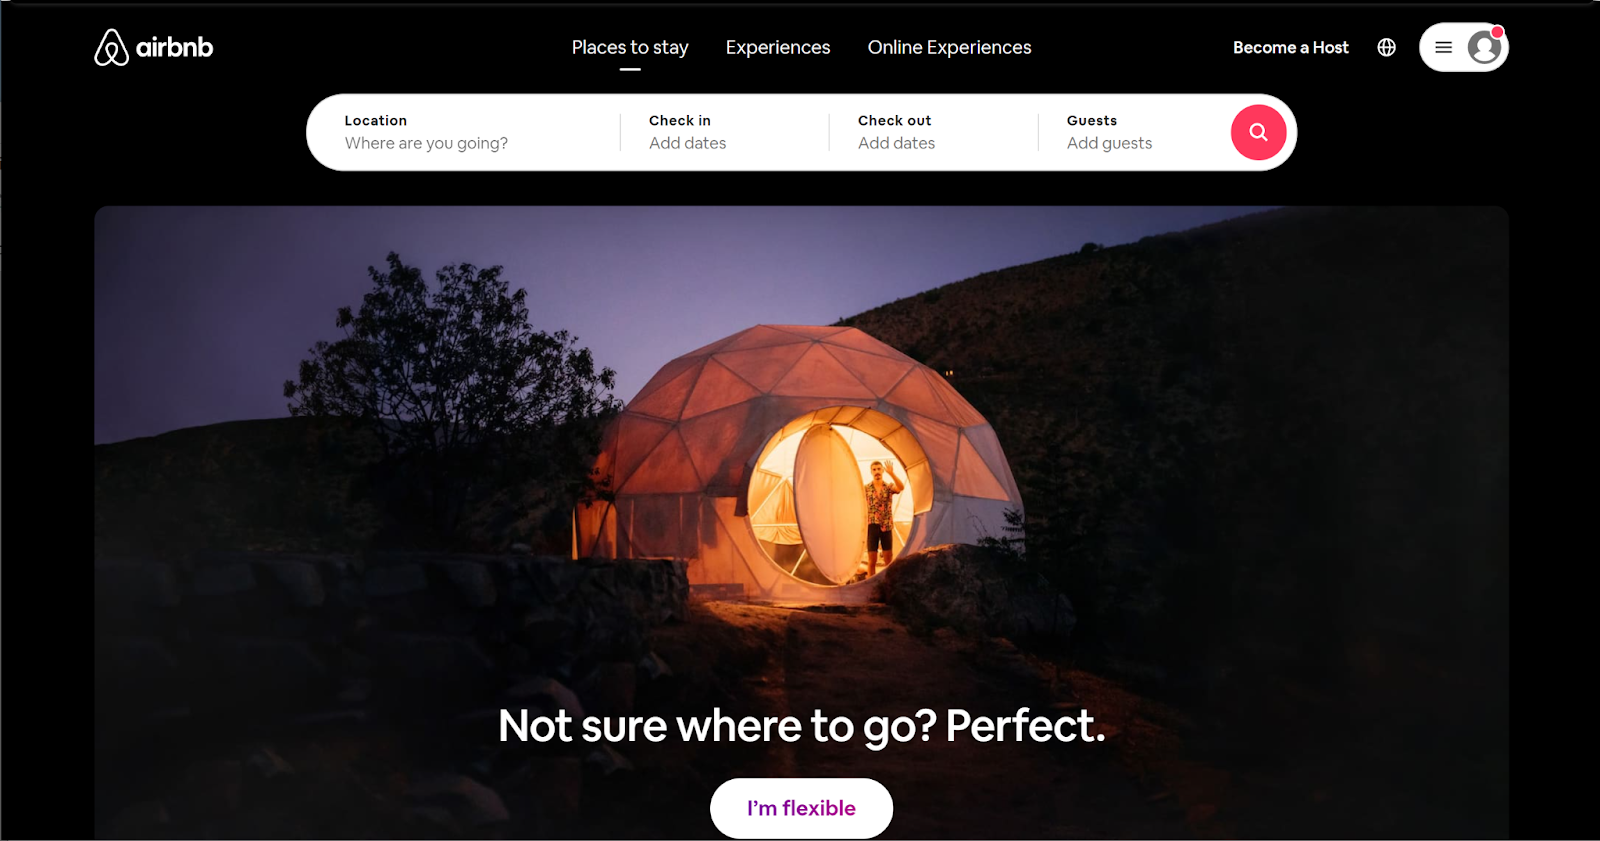 In the 2021 home page, there are boxes at the top of the page to select location, dates, and number of guests. The rest of the page is taken up by a large image of a geodesic cabin with a rotating circular door. A caption says "Not sure where to go?" You can click a button below it to explore options.